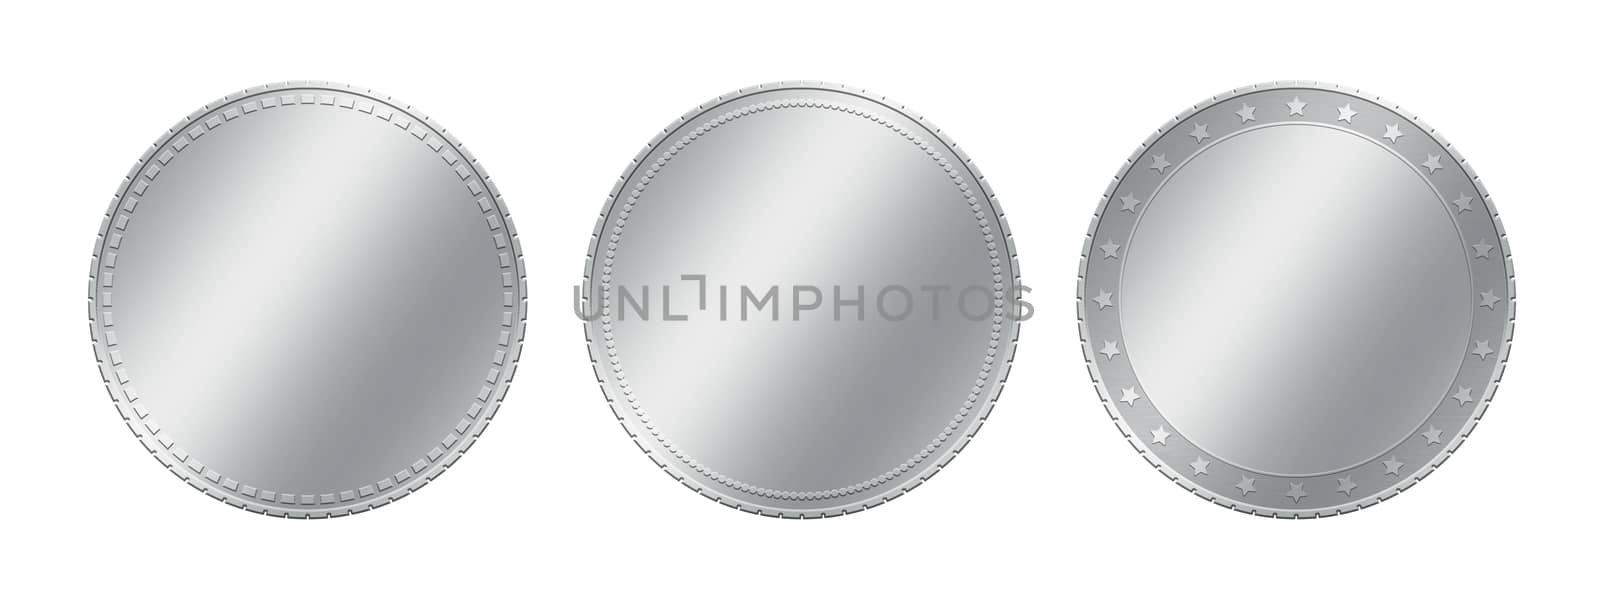 Three different silver coins over white by BreakingTheWalls